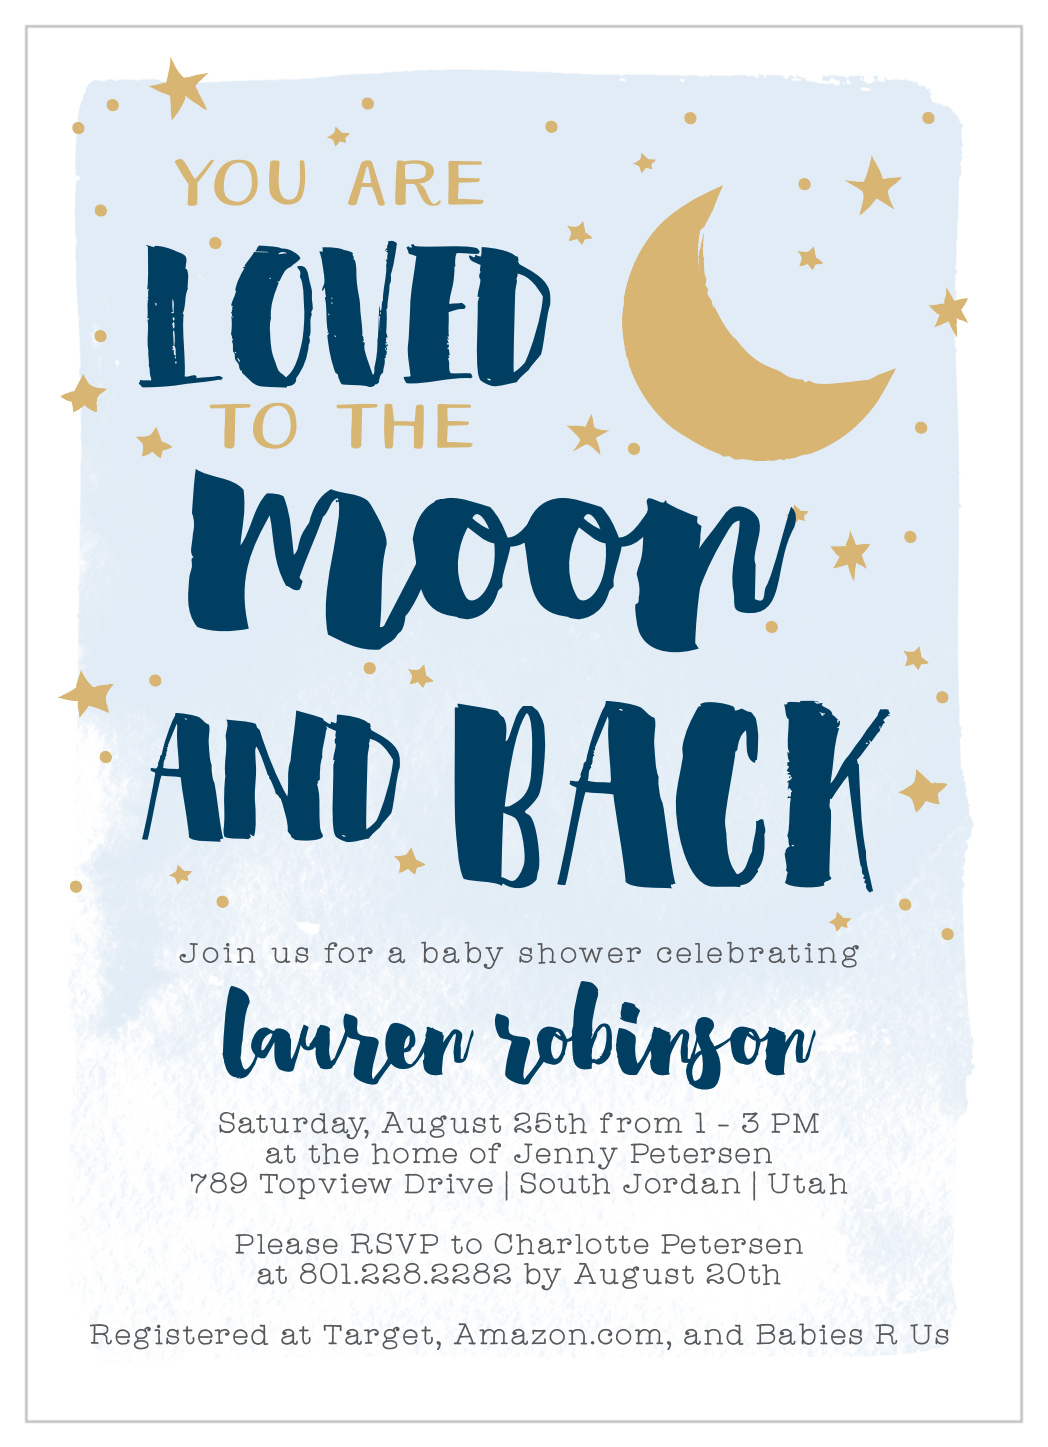 To The Moon Baby Shower Invitations